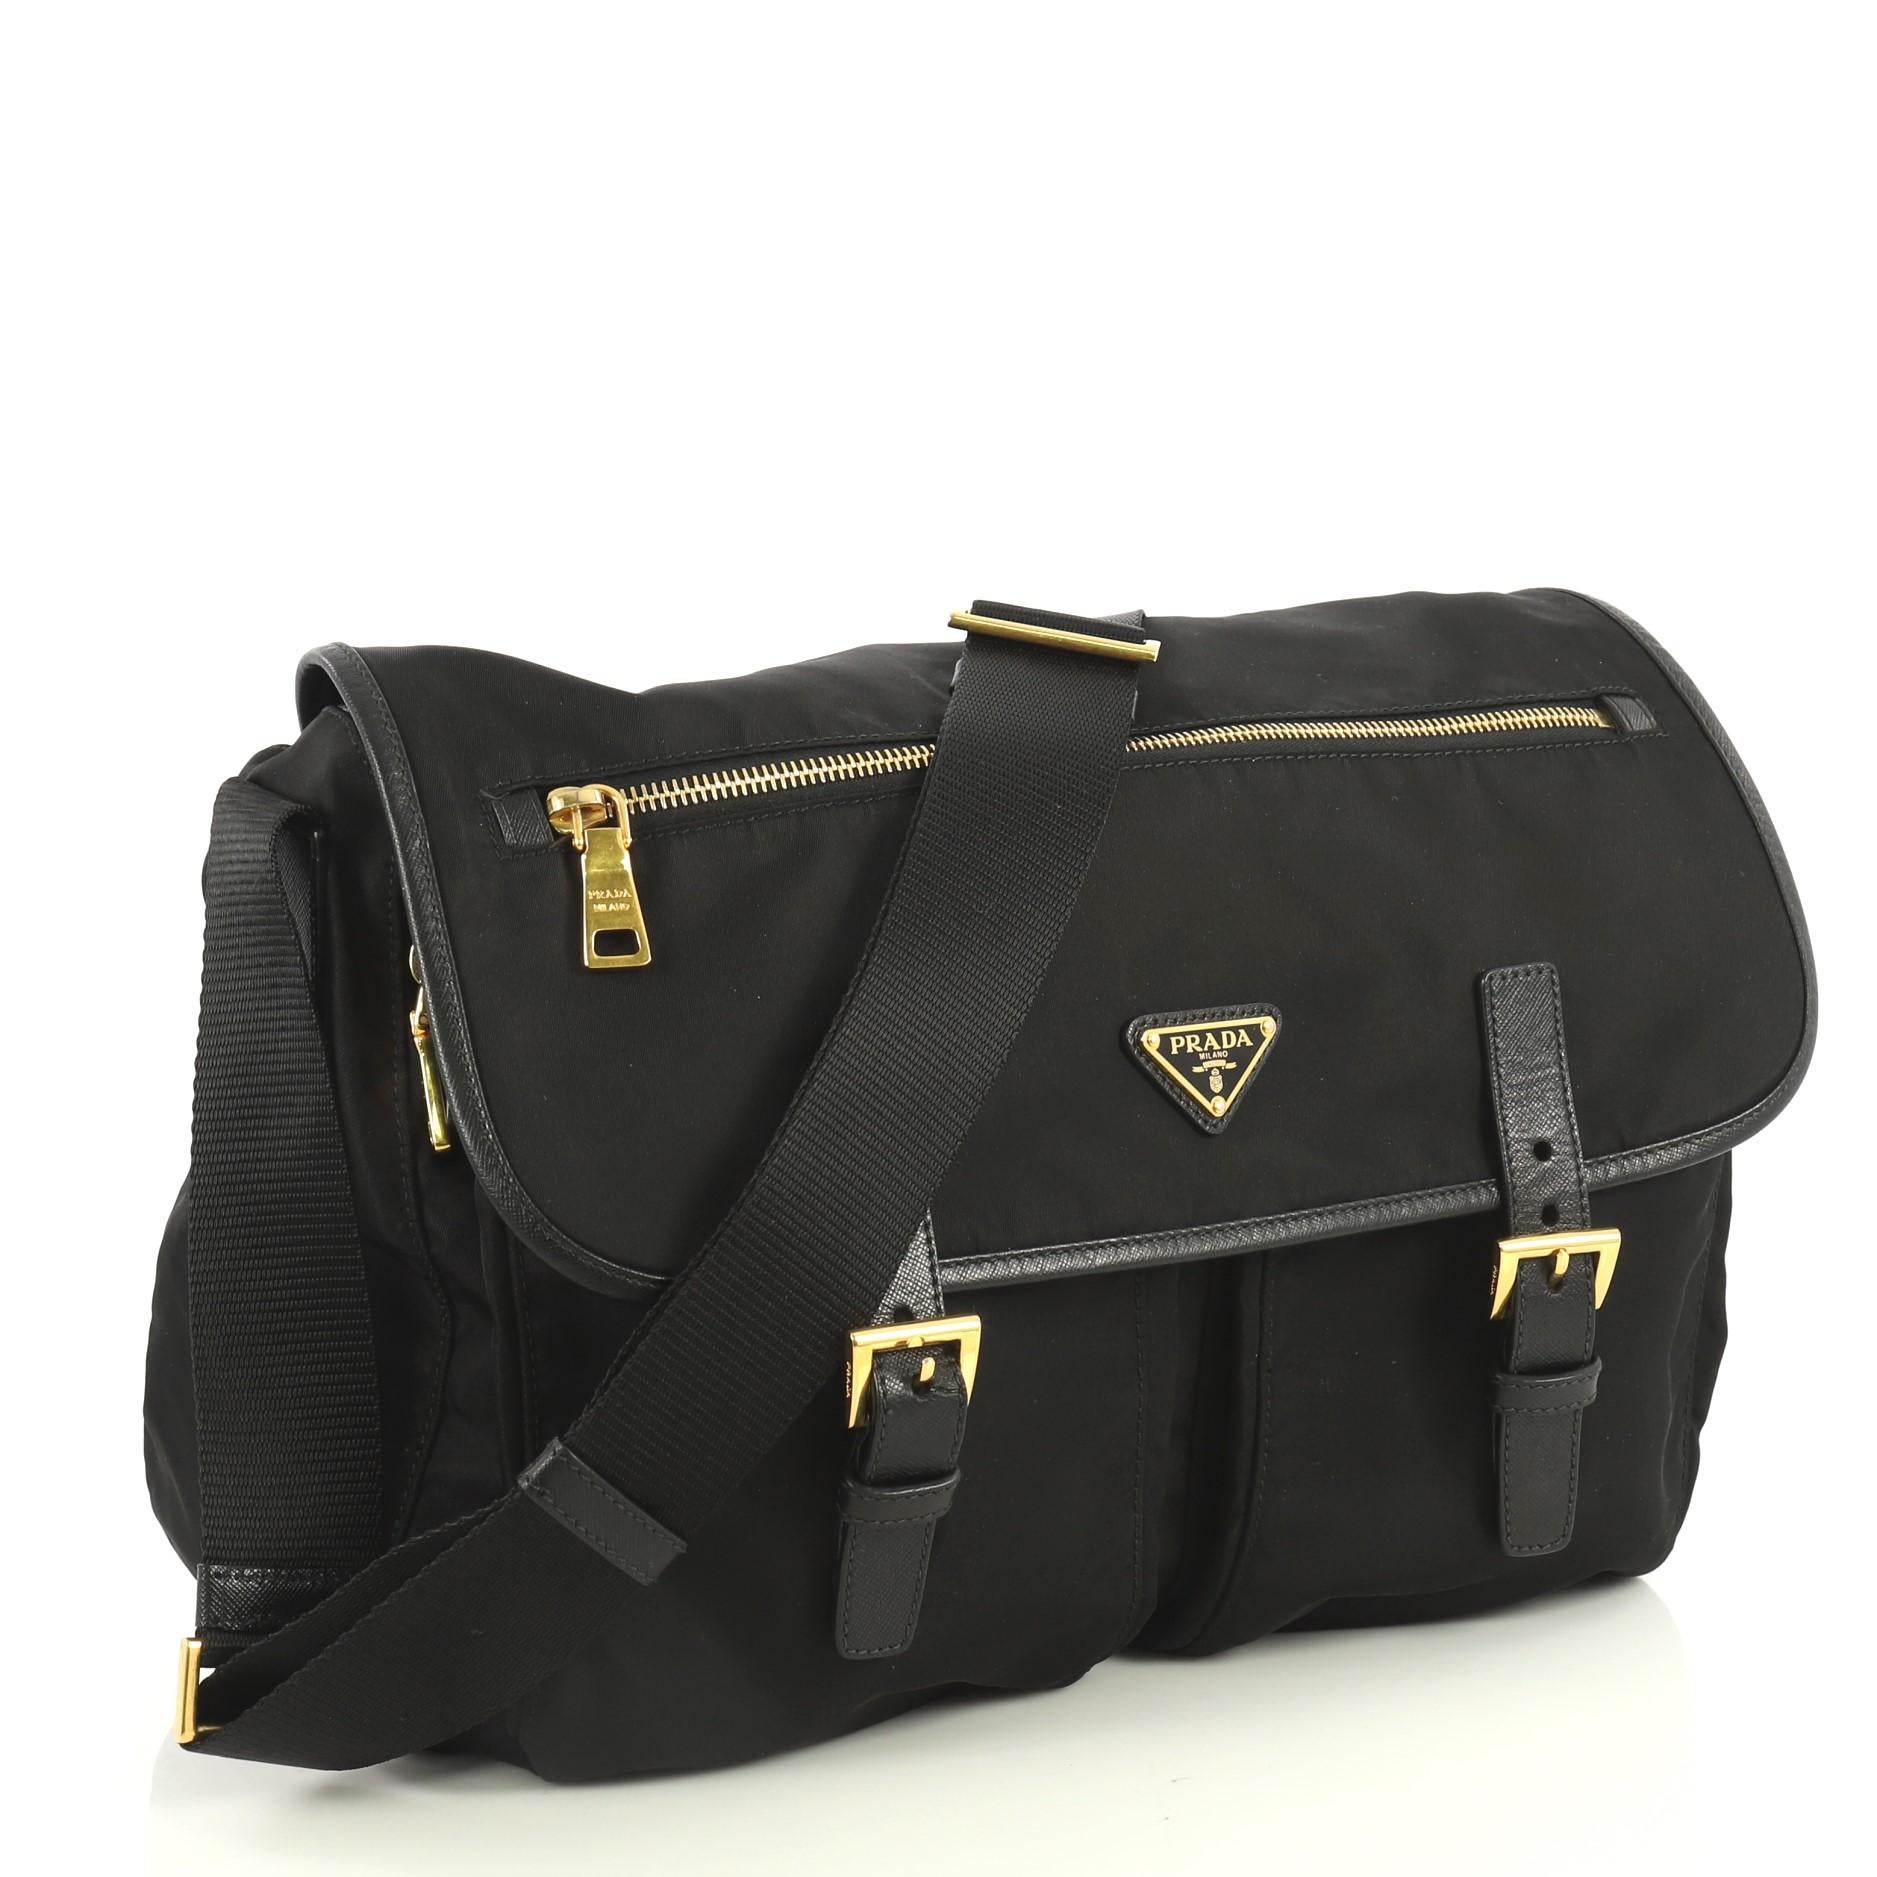 This Prada Zip Buckle Messenger Bag Tessuto Large, crafted from black tessuto, features an adjustable shoulder strap, exterior front zip pocket on flap, two zip pockets under flap, and gold-tone hardware. Its flap and zip closures open to a black